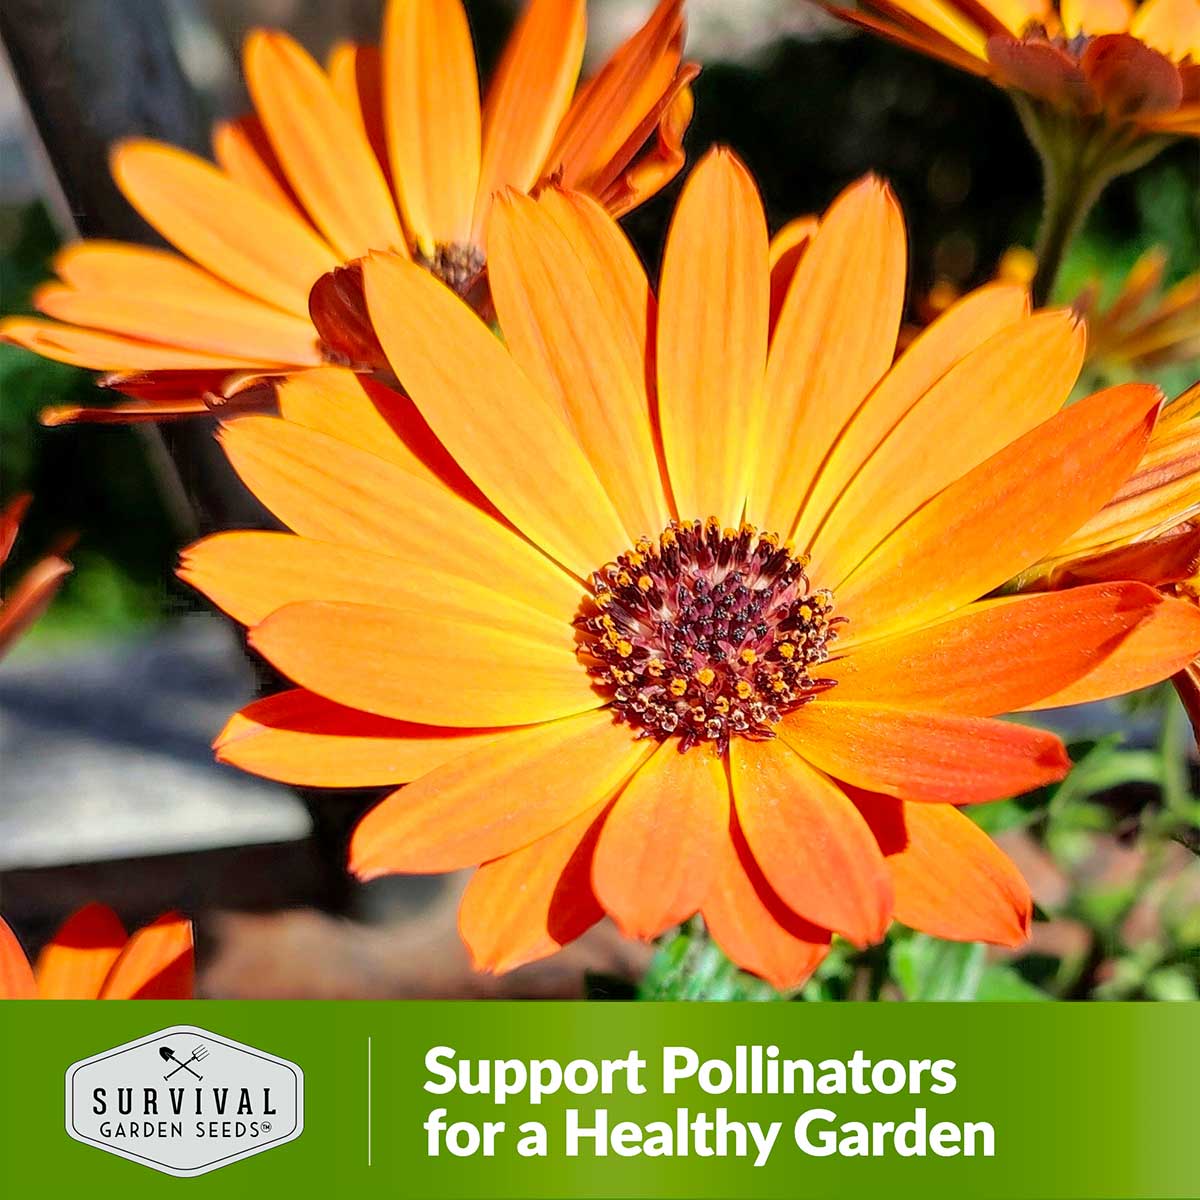 African Flake Daisies support pollinators for a healthy garden